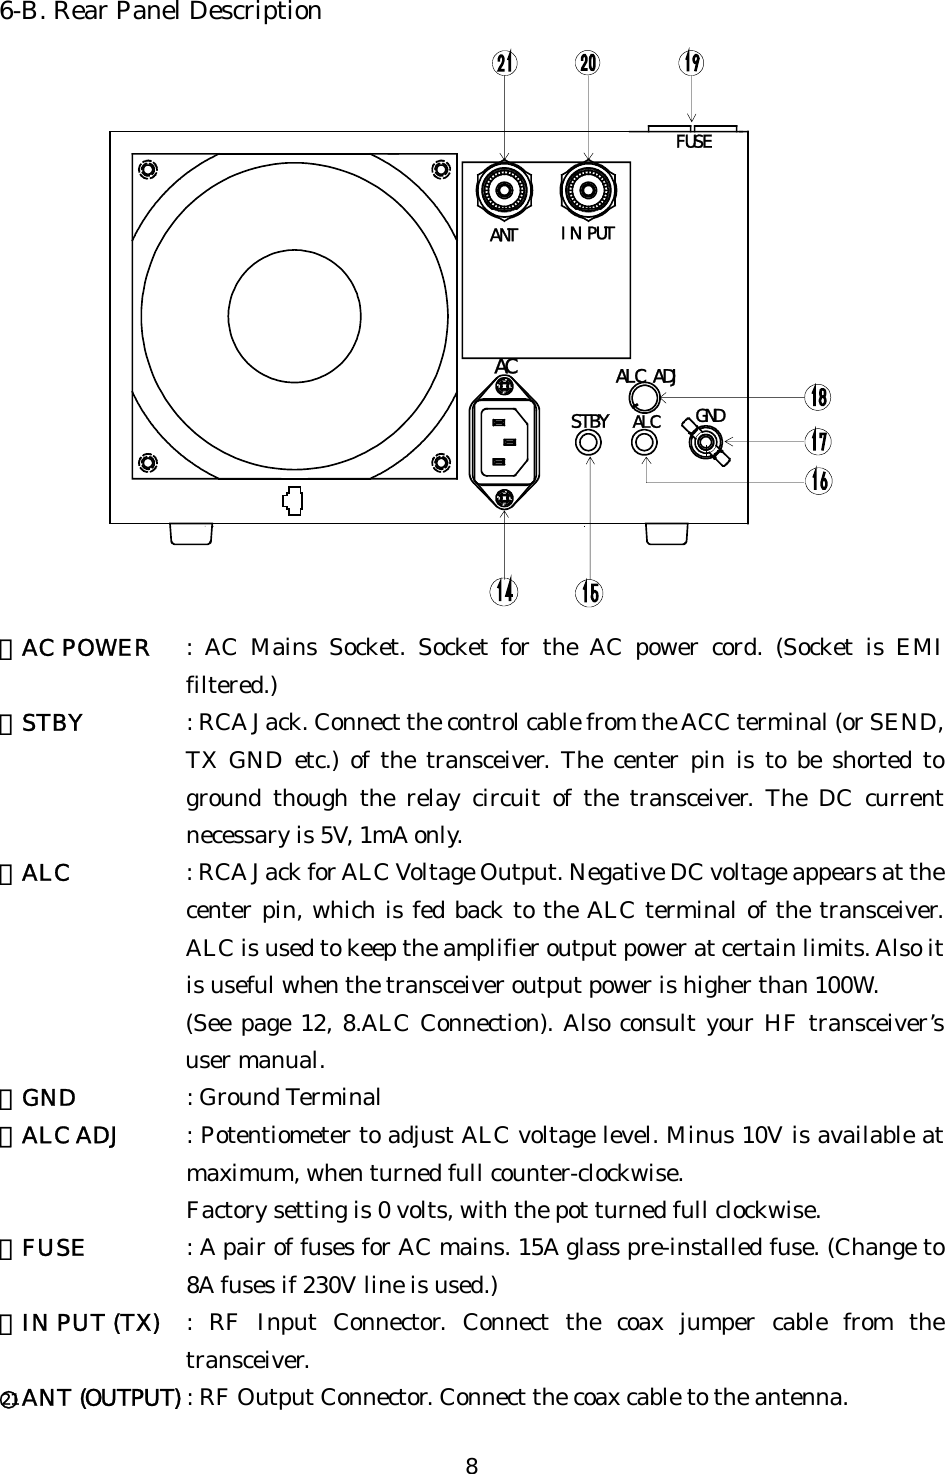 6-B. Rear Panel Description ALCALC ADJSTBYGNDFUSEIN PUTANTAC ⑭AC POWER  : AC Mains Socket. Socket for the AC power cord. (Socket is EMI filtered.) ⑮STBY  : RCA Jack. Connect the control cable from the ACC terminal (or SEND, TX GND etc.) of the transceiver. The center pin is to be shorted to ground though the relay circuit of the transceiver. The DC current necessary is 5V, 1mA only. ⑯ALC  : RCA Jack for ALC Voltage Output. Negative DC voltage appears at the center pin, which is fed back to the ALC terminal of the transceiver. ALC is used to keep the amplifier output power at certain limits. Also it is useful when the transceiver output power is higher than 100W. (See page 12, 8.ALC Connection). Also consult your HF transceiver’s user manual. ⑰GND  : Ground Terminal ⑱ALC ADJ  : Potentiometer to adjust ALC voltage level. Minus 10V is available at maximum, when turned full counter-clockwise. Factory setting is 0 volts, with the pot turned full clockwise. ⑲FUSE  : A pair of fuses for AC mains. 15A glass pre-installed fuse. (Change to 8A fuses if 230V line is used.) ⑳IN PUT (TX)  : RF Input Connector. Connect the coax jumper cable from the transceiver. ○21ANT (OUTPUT) : RF Output Connector. Connect the coax cable to the antenna. 8 